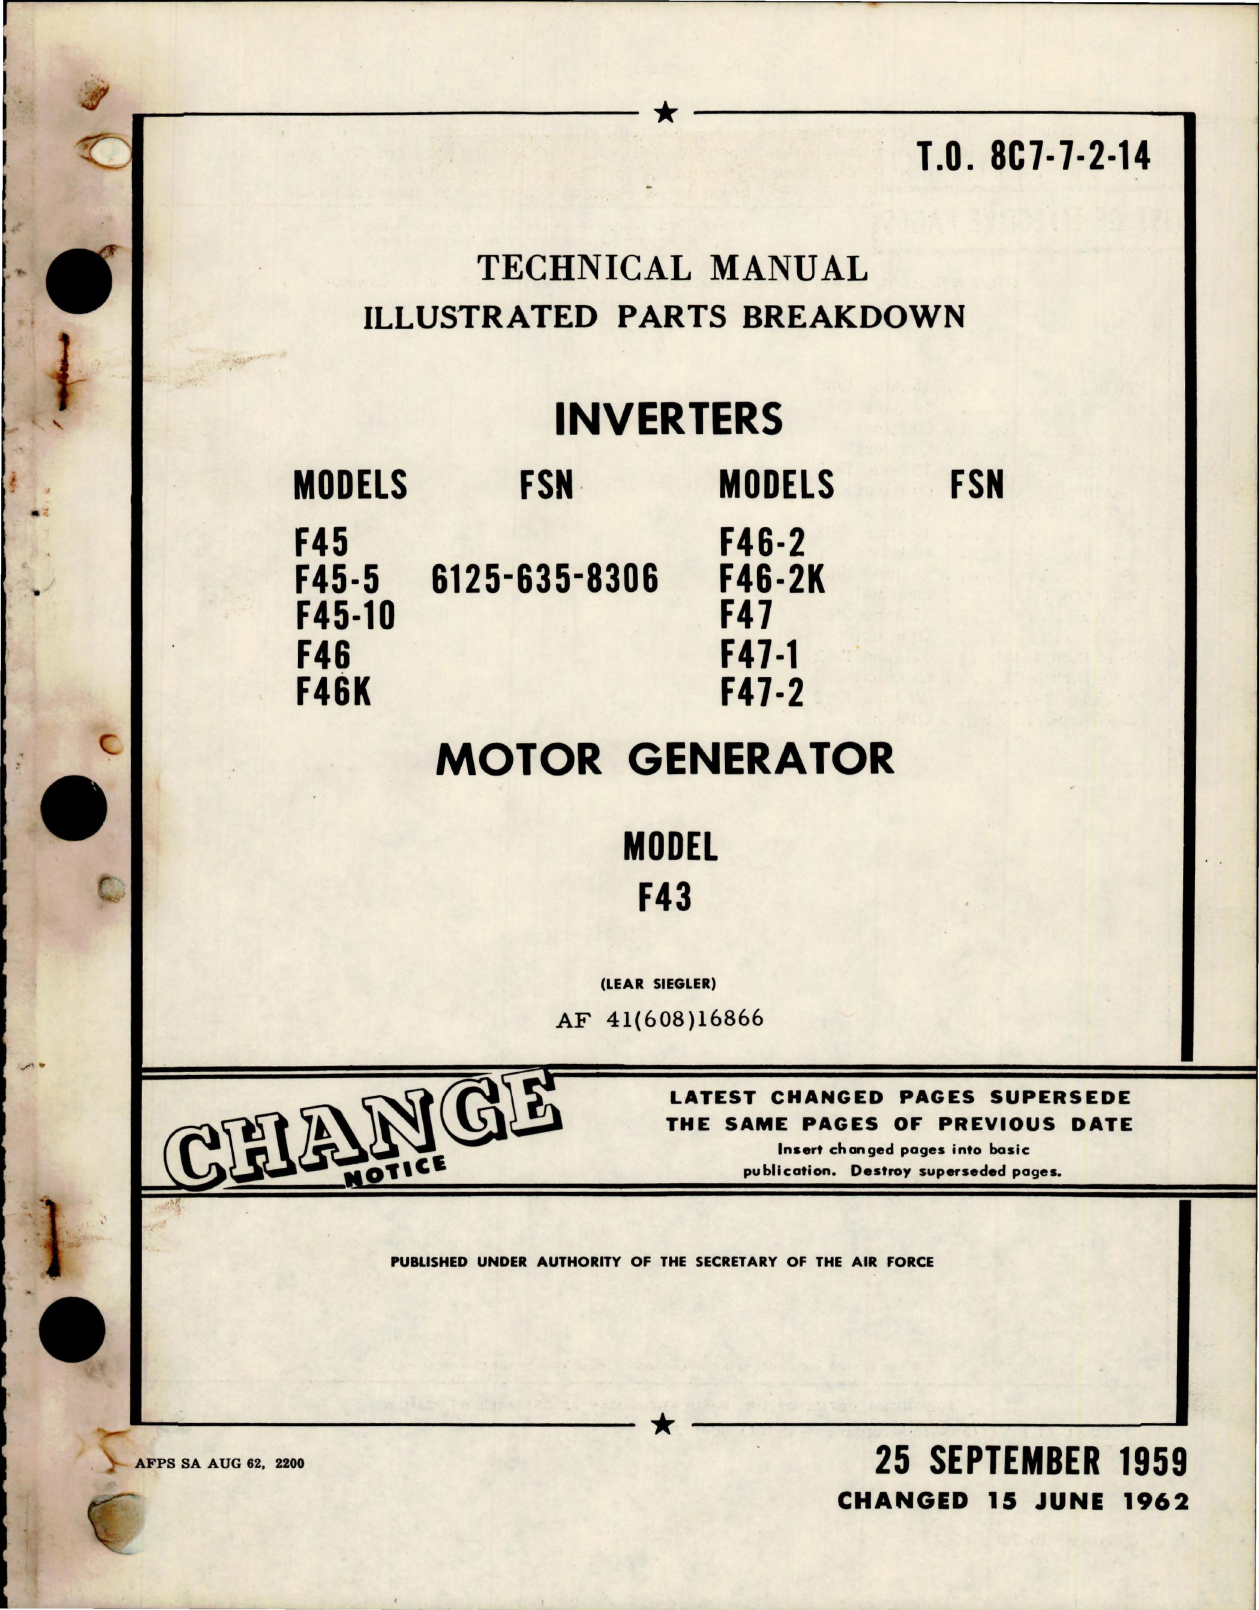 Sample page 1 from AirCorps Library document: Illustrated Parts Breakdown for Inverters and Motor Generators